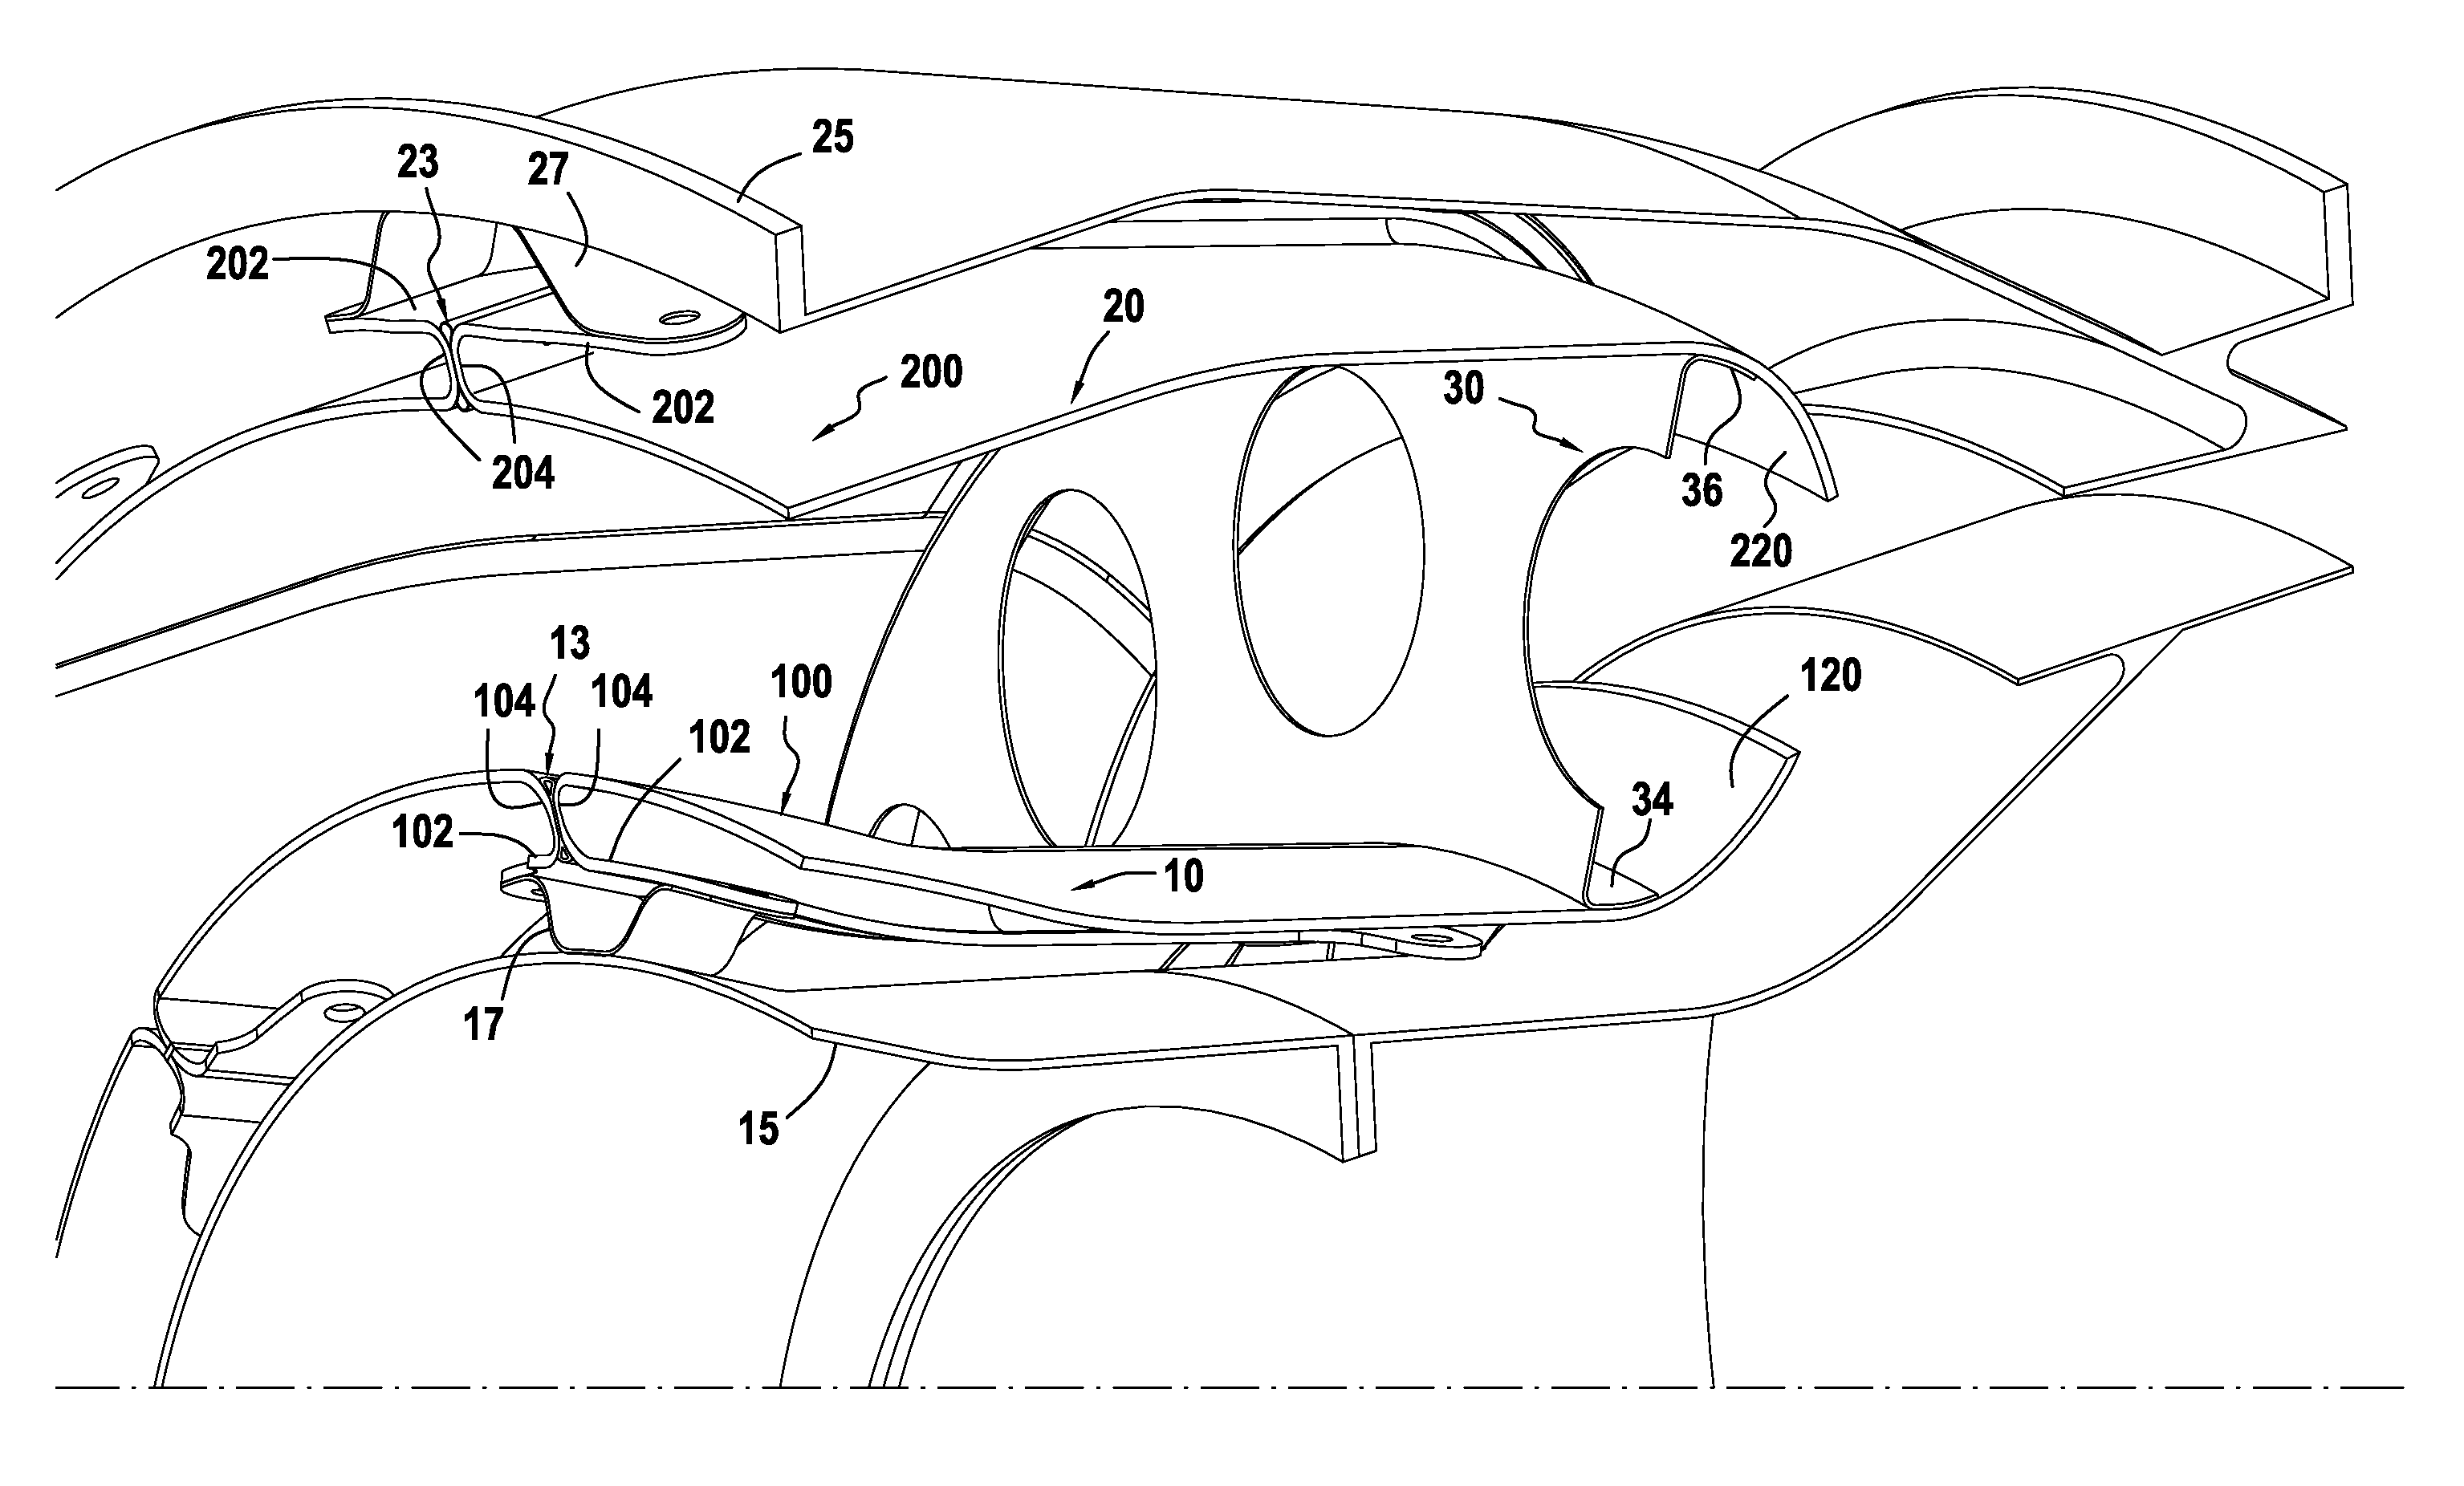 Gas turbine combustion chamber having inner and outer walls subdivided into sectors